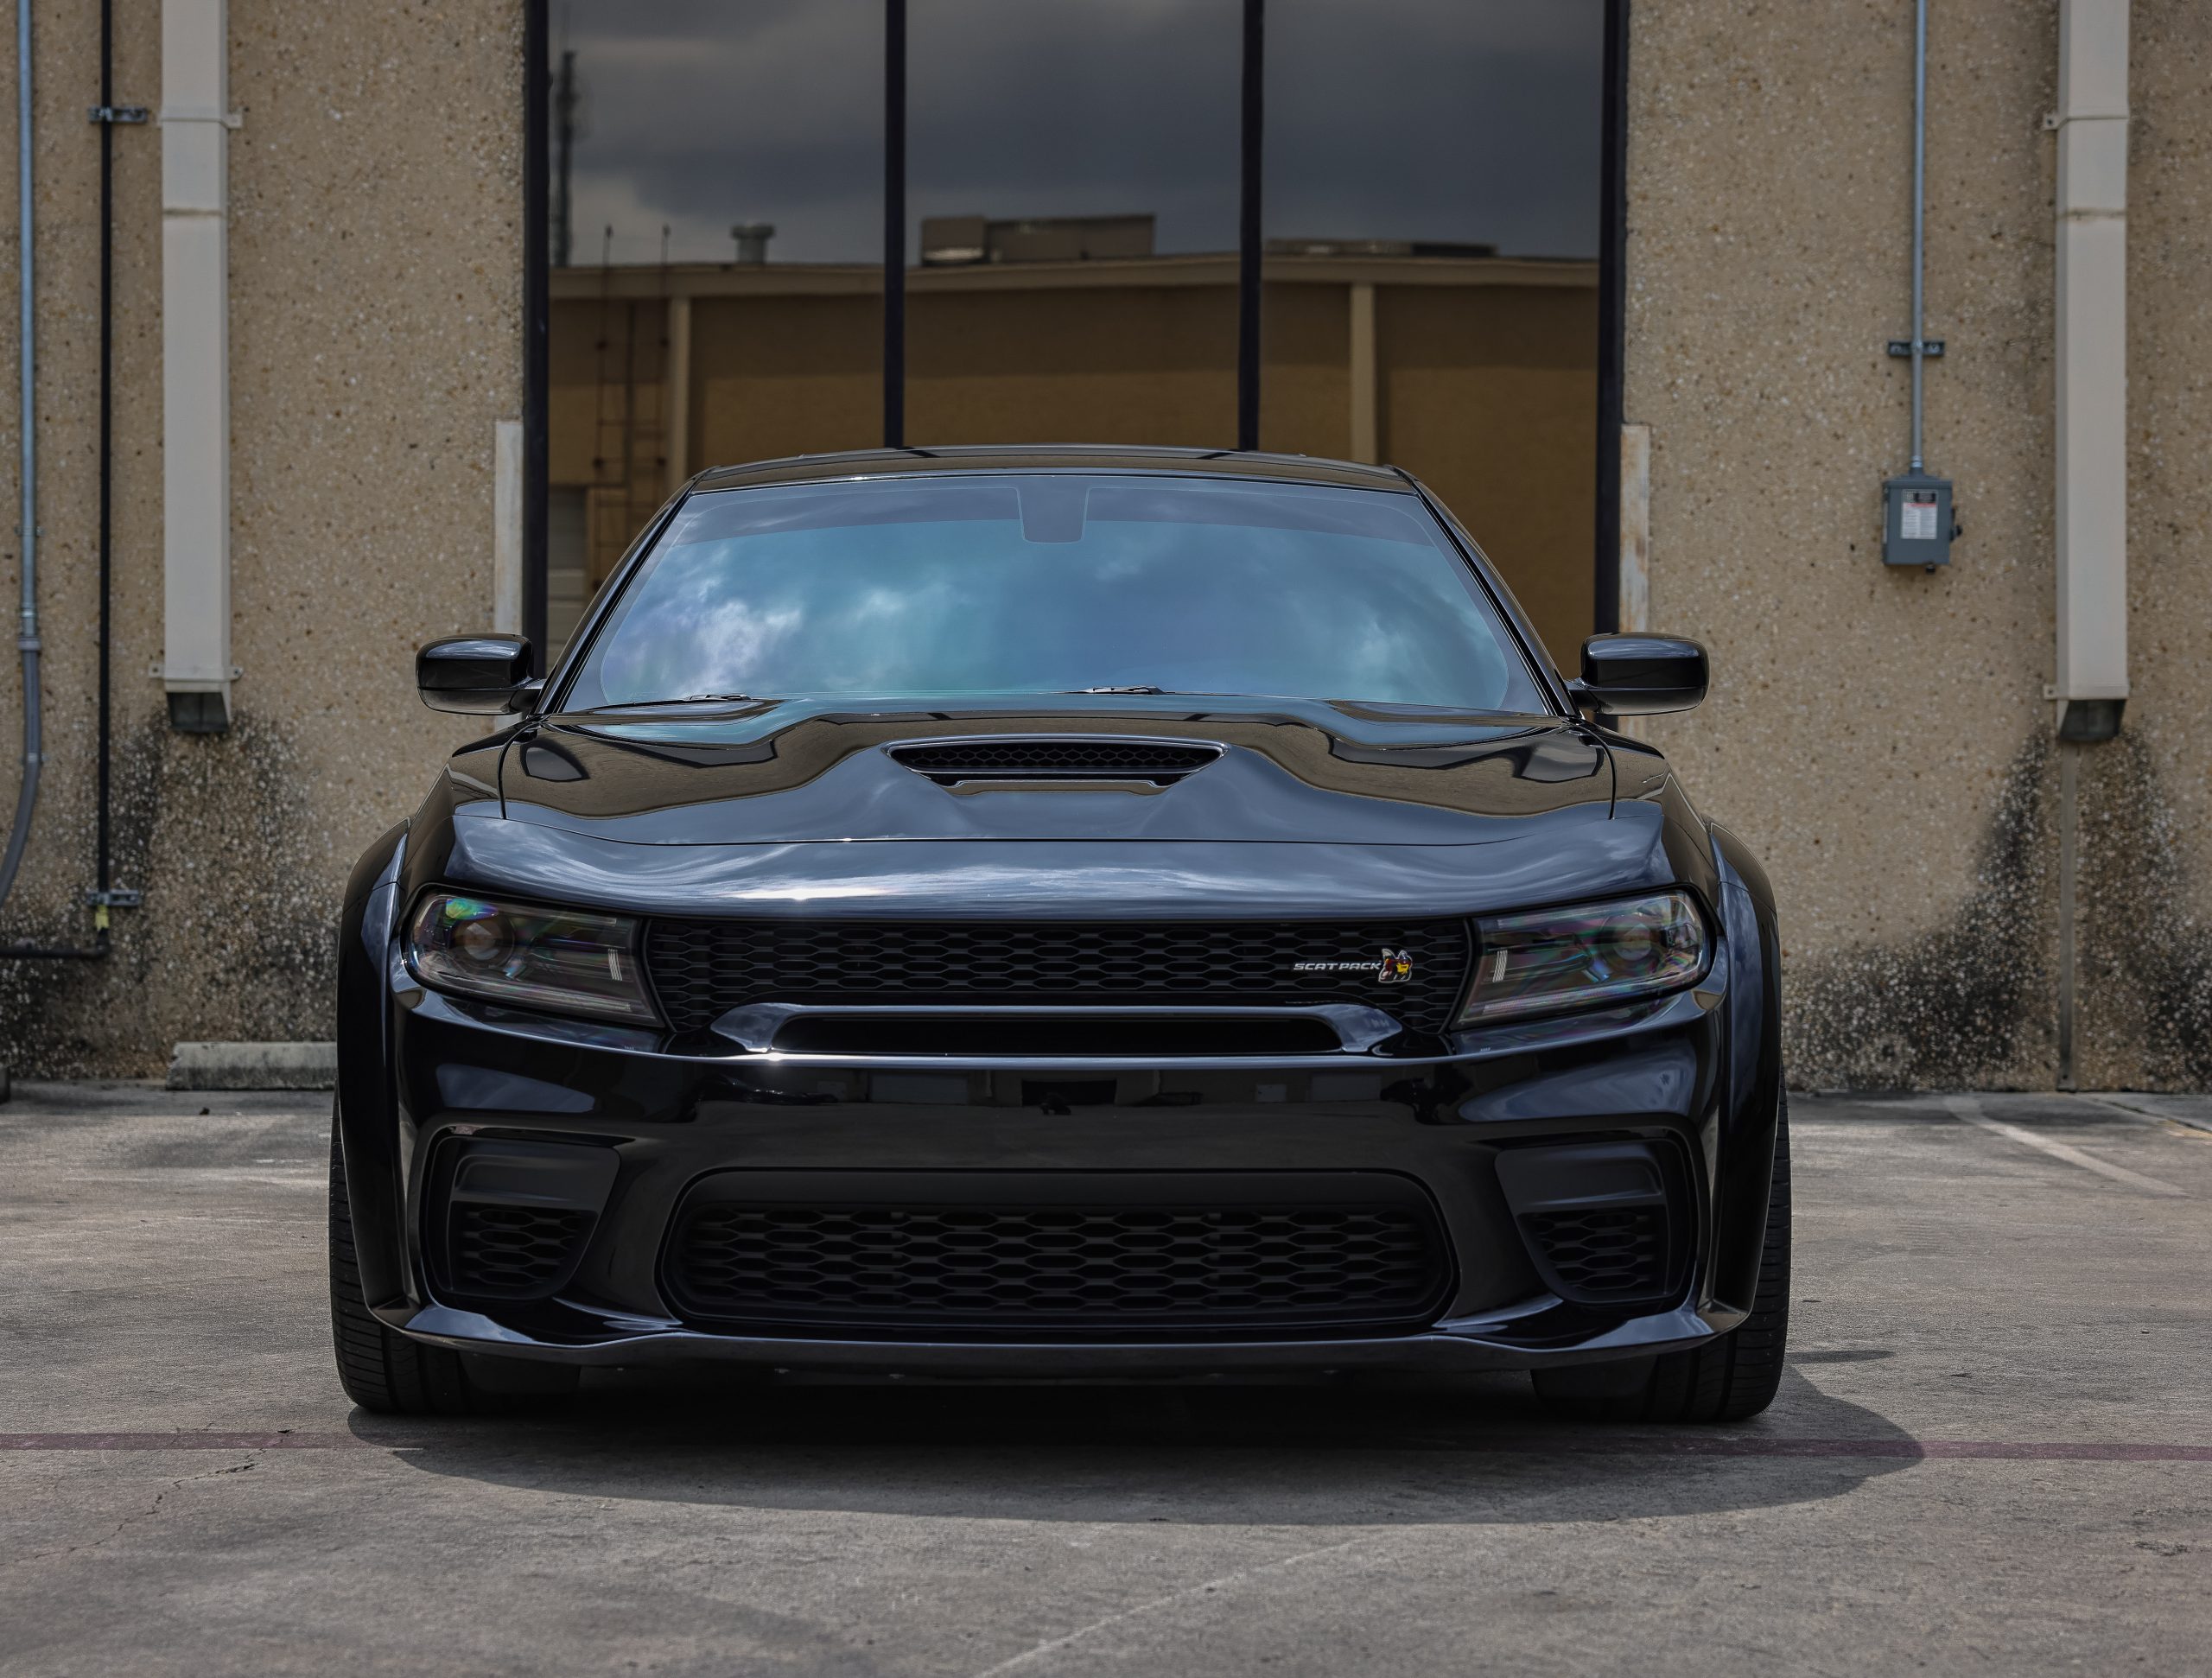 SunTek Reaction PPF Protects Dodge Charger 392 Scat Pack Widebody - Automotive Paint Protection Services in San Antonio, Texas-5